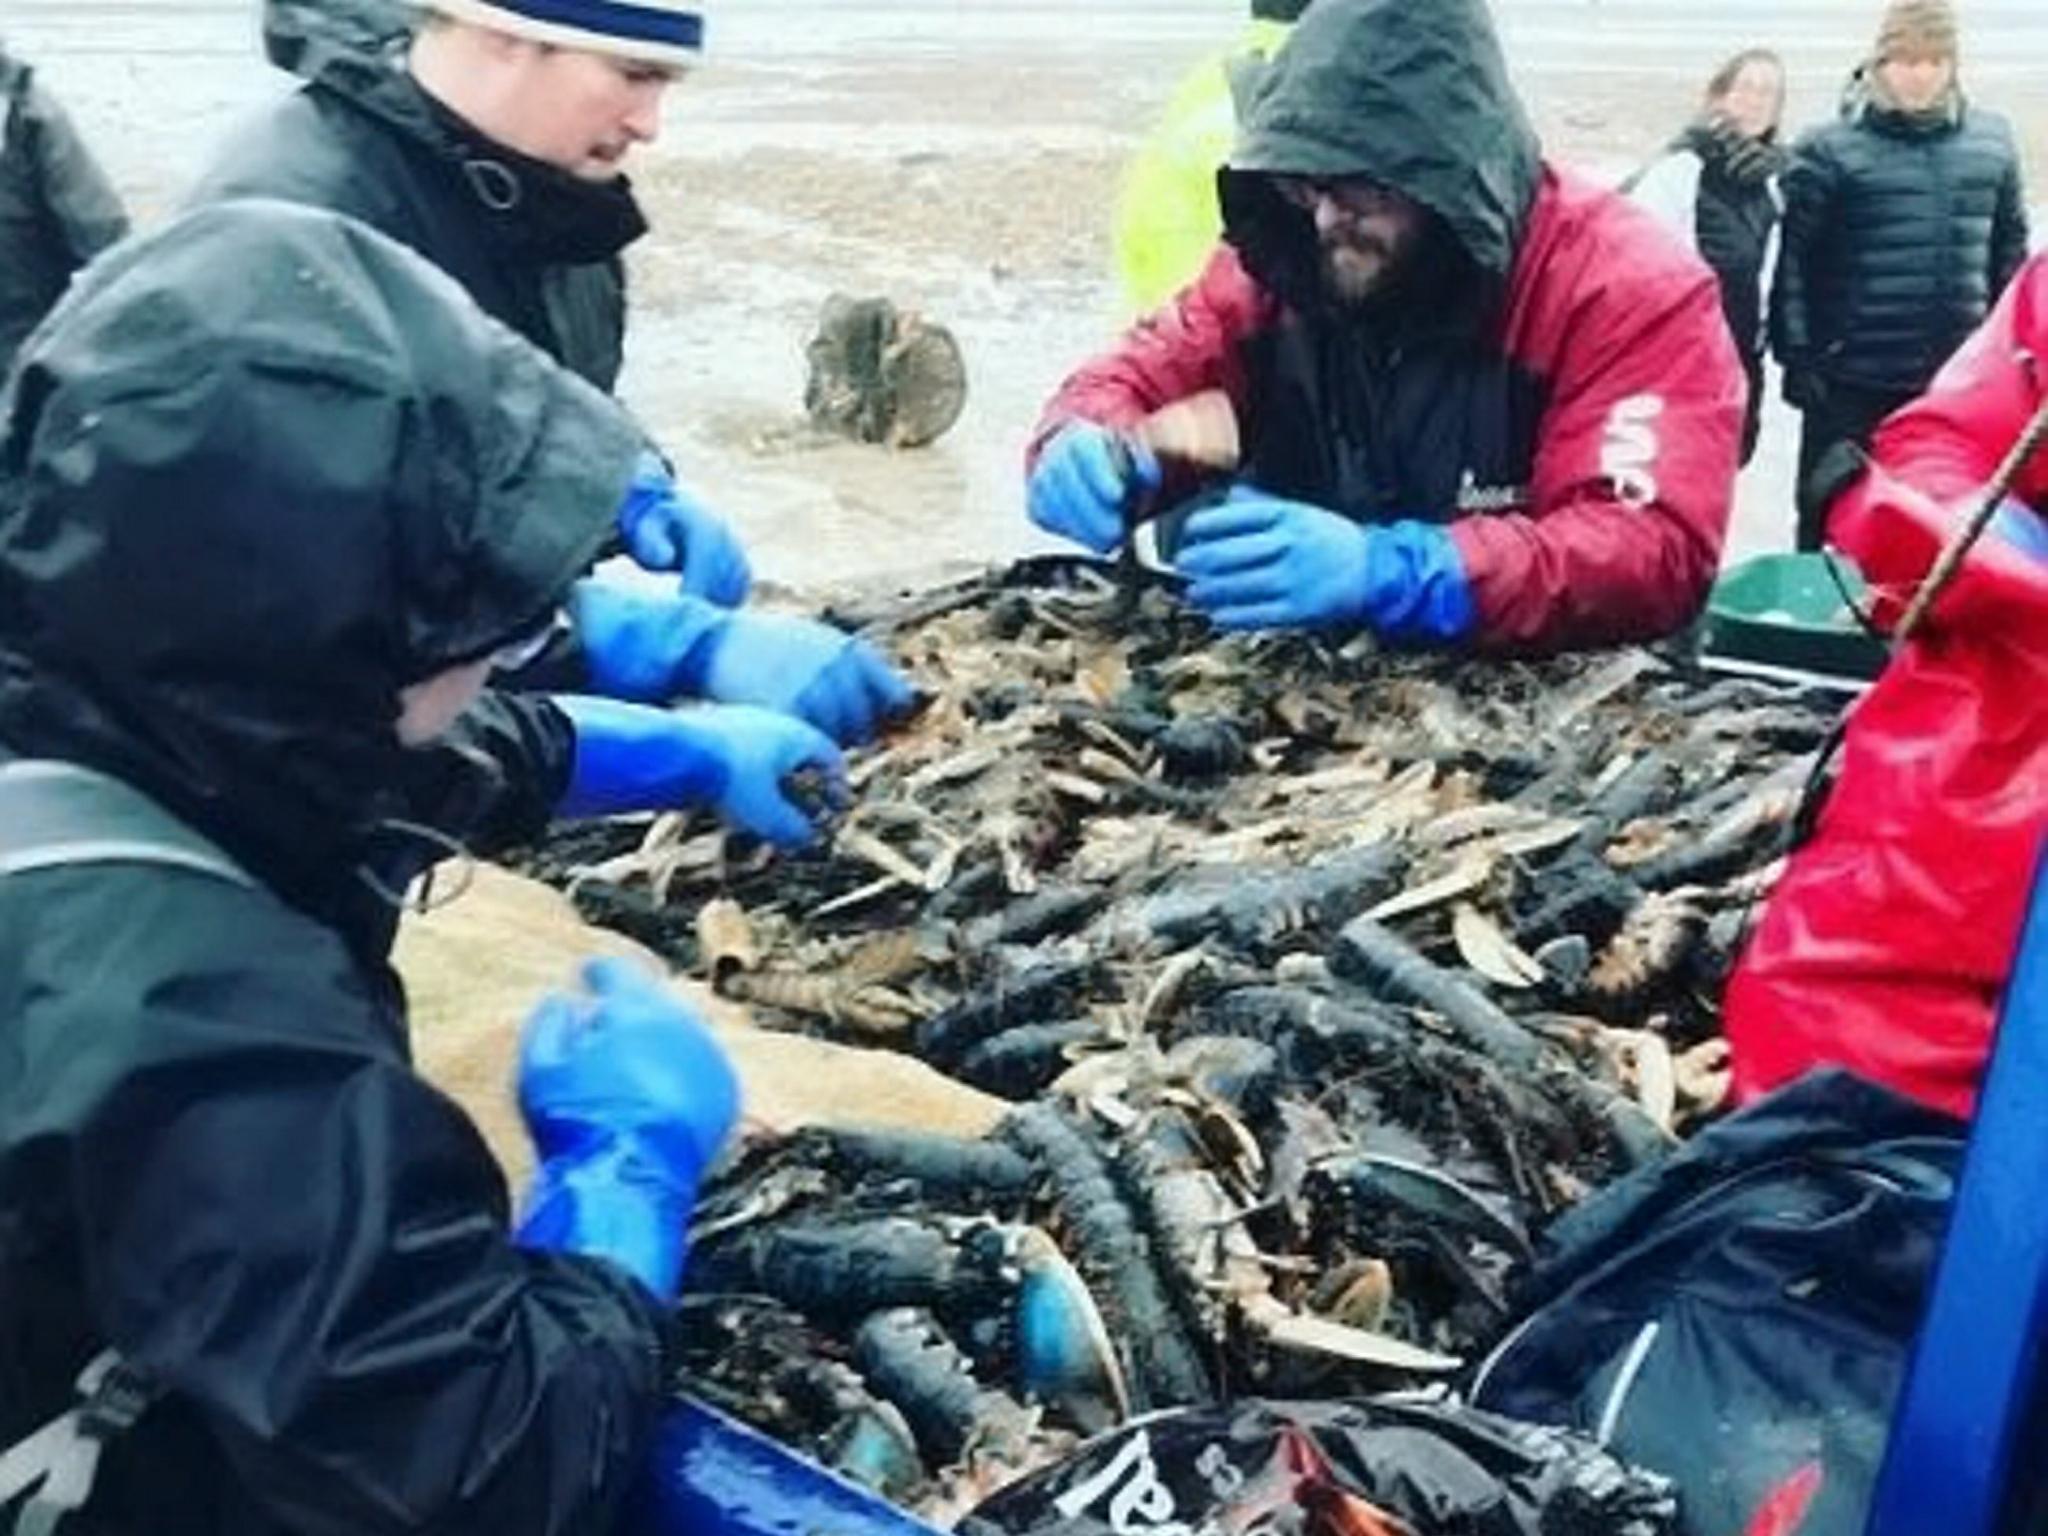 Fishermen rescued some of the critters and released them back into the sea